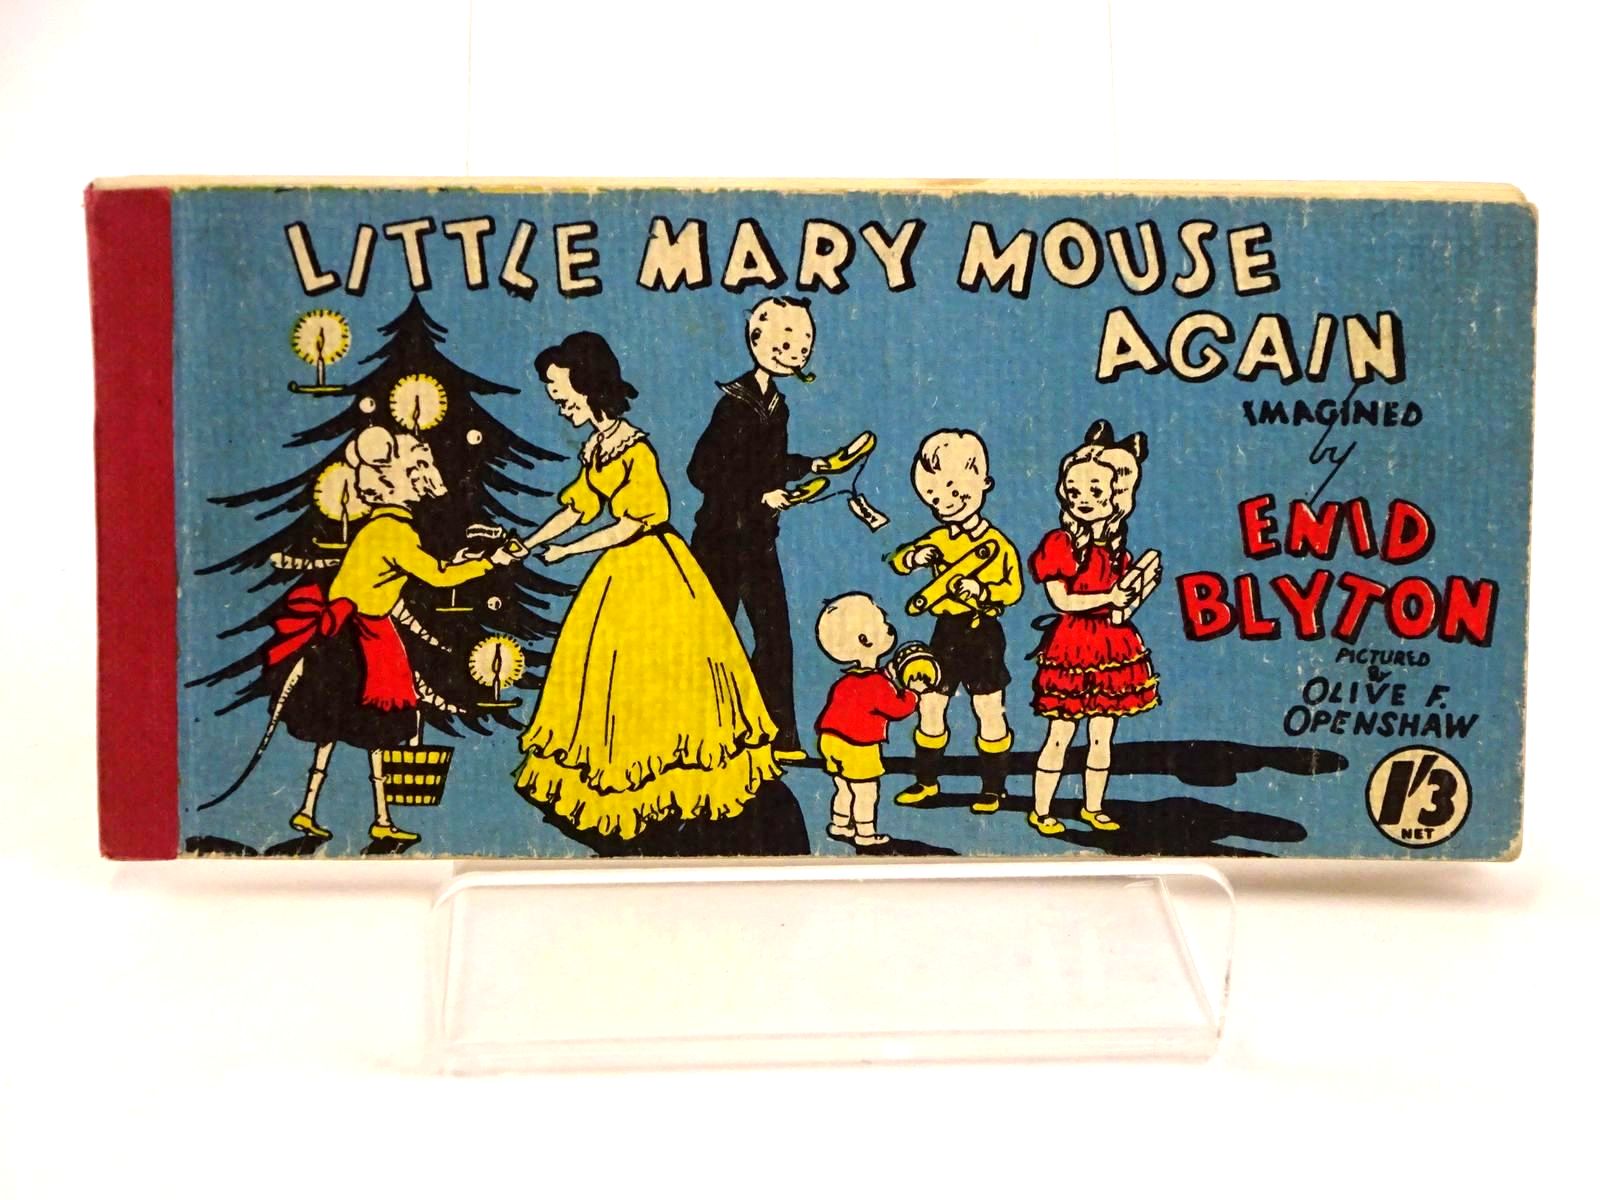 Photo of LITTLE MARY MOUSE AGAIN written by Blyton, Enid illustrated by Openshaw, Olive F. published by Brockhampton Press Ltd. (STOCK CODE: 1318427)  for sale by Stella & Rose's Books